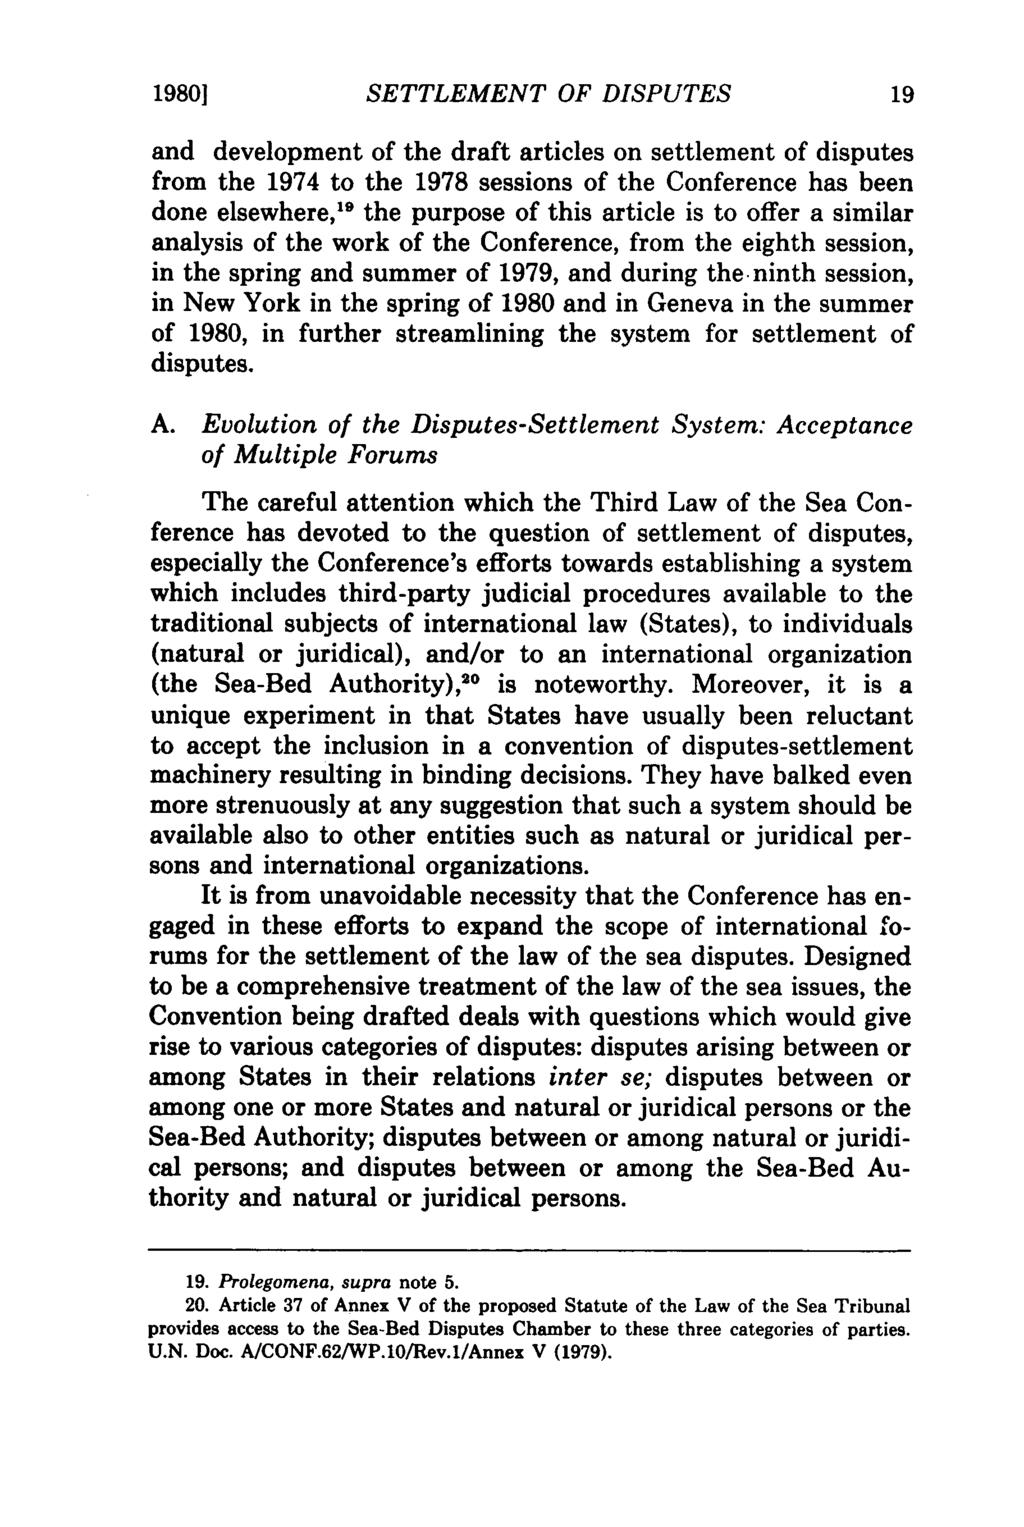 19801 SETTLEMENT OF DISPUTES and development of the draft articles on settlement of disputes from the 1974 to the 1978 sessions of the Conference has been done elsewhere,' 9 the purpose of this